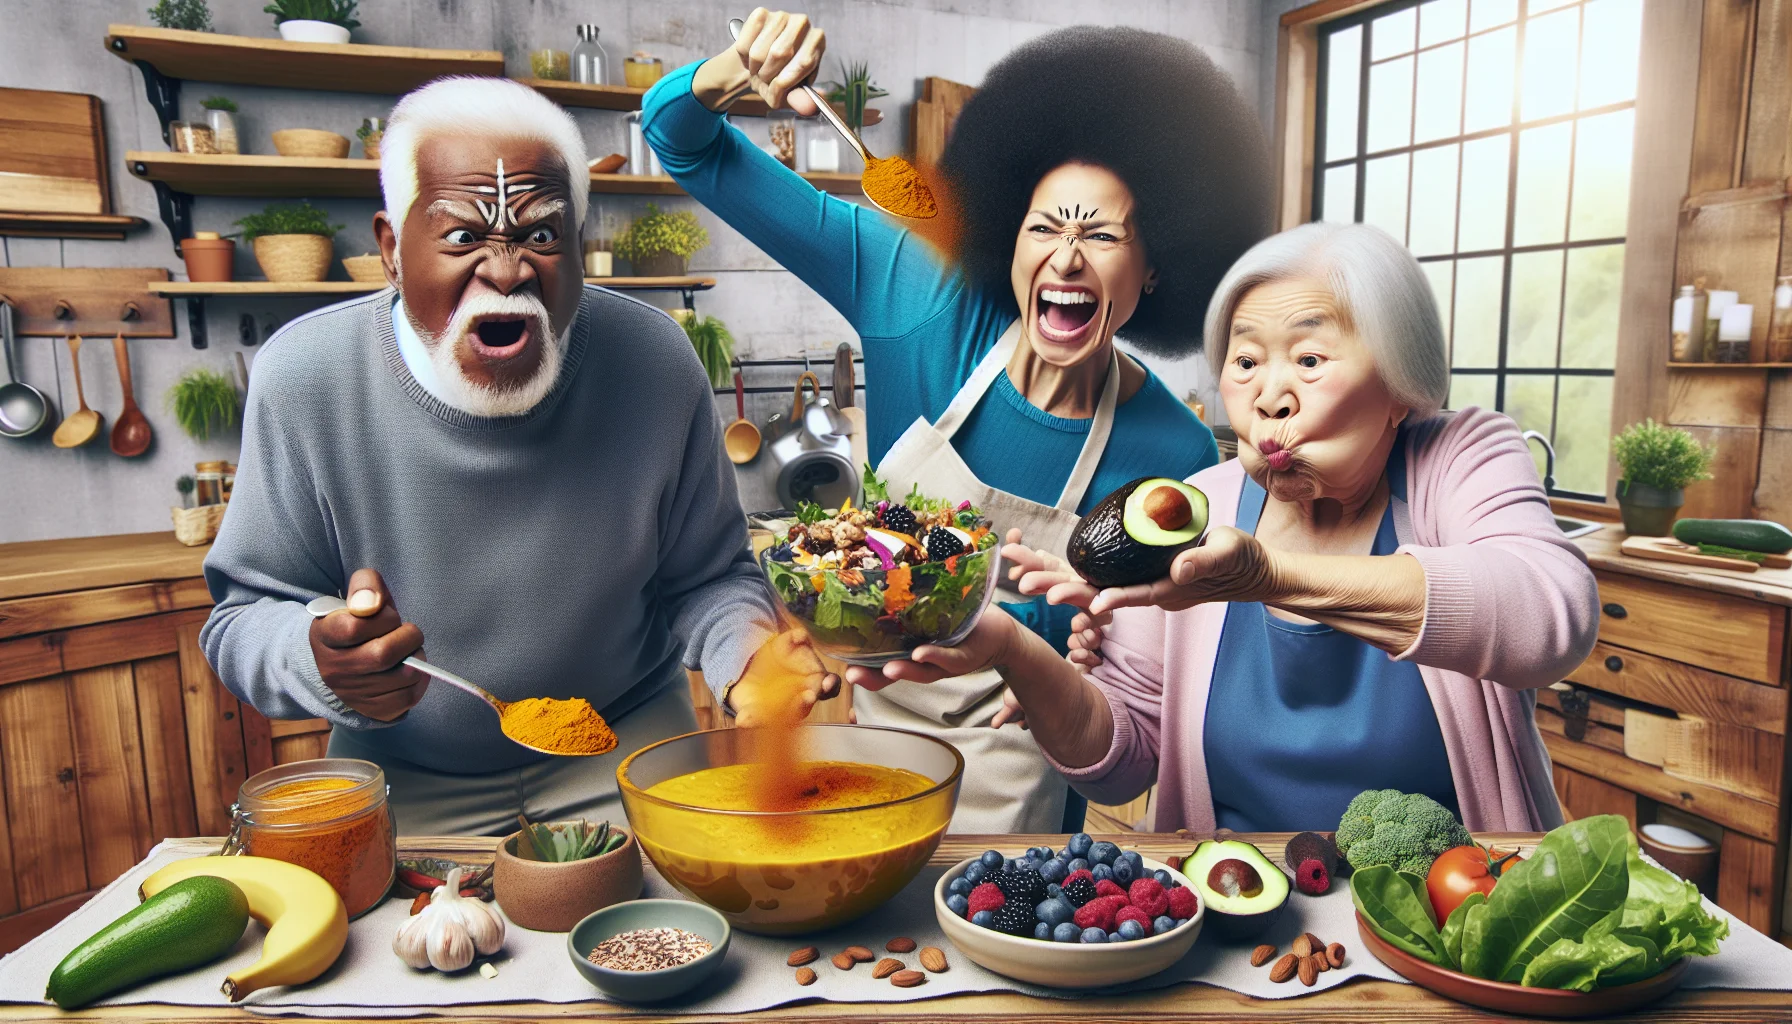 Generate a humorous, realistic scene of three senior citizens engaged in preparing and savoring a feast full of anti-inflammatory foods. Picture an Afro-Caribbean elderly woman passionately giving a live demo of how to whip up turmeric-infused lentil soup, a Caucasian elderly man enthusiastically garnishing a salad with an abundance of berries and nuts, each of them fussing over the details. Meanwhile, an Asian elderly woman is seen playfully trying to balance an oversized avocado on a spoon. The backdrop fades into a kitchen ambiance filled with vibrant colors, laughter, and a sense of camaraderie.